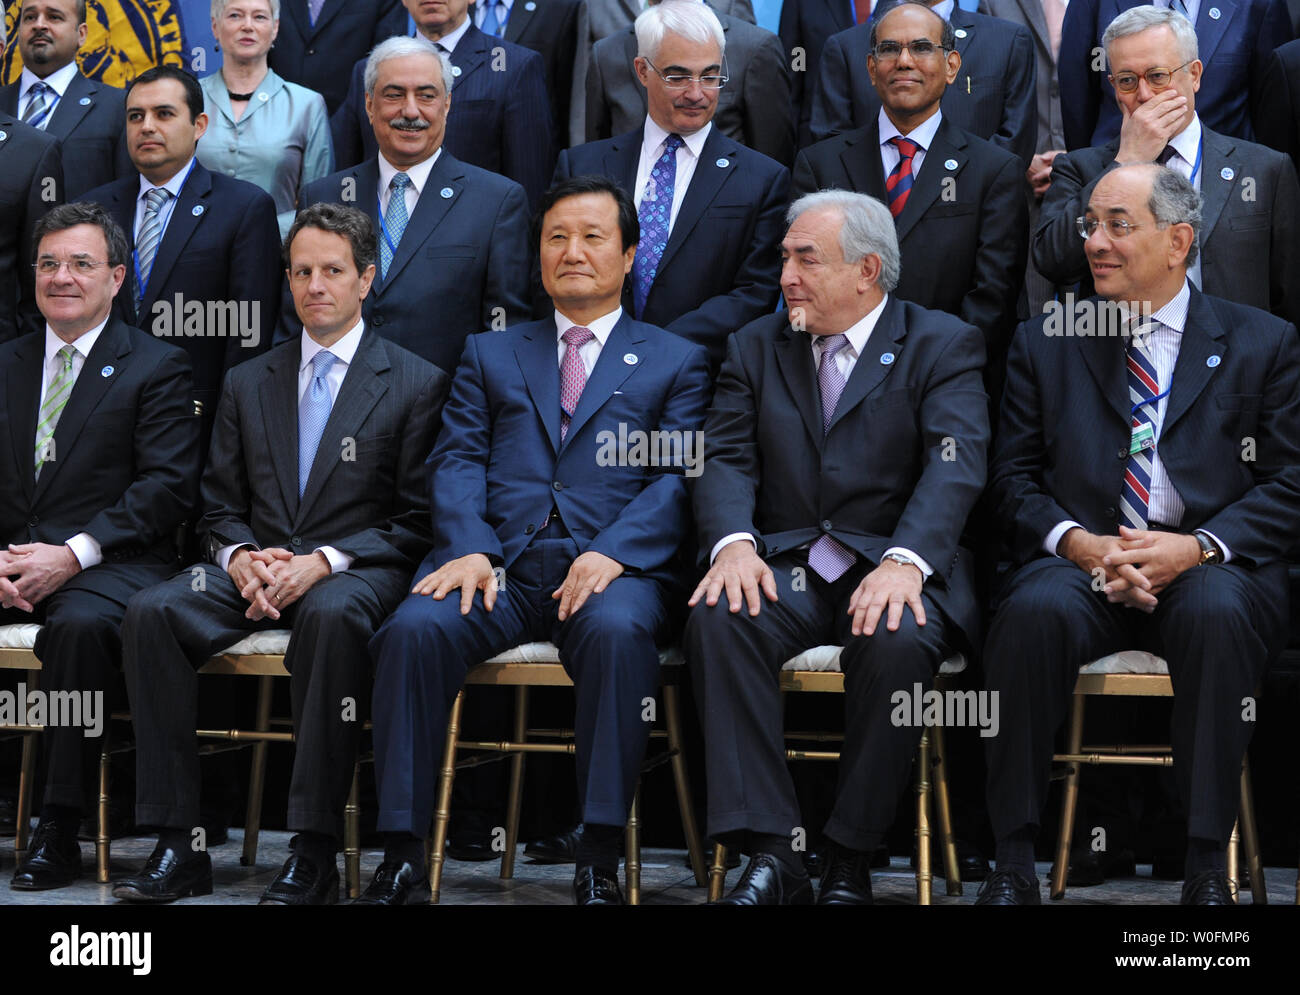 Members of International Monetary and Financial Committee (IMFC) gather for a group photo during the International Monetary Fund (IMF) and World Bank Spring Meetings in Washington on April 24, 2010. Seated (front row, L to R) are Canada's Finance Minister Jim Flaherty, U.S. Treasury Secretary Tim Geithner and Jeung-Hyun Yoon, governor of the Bank of Korea, IMF Managing Director Dominique Strauss-Kahn, and IMFC Chairman Youssef Boutros-Ghaligather. UPI/Alexis C. Glenn Stock Photo